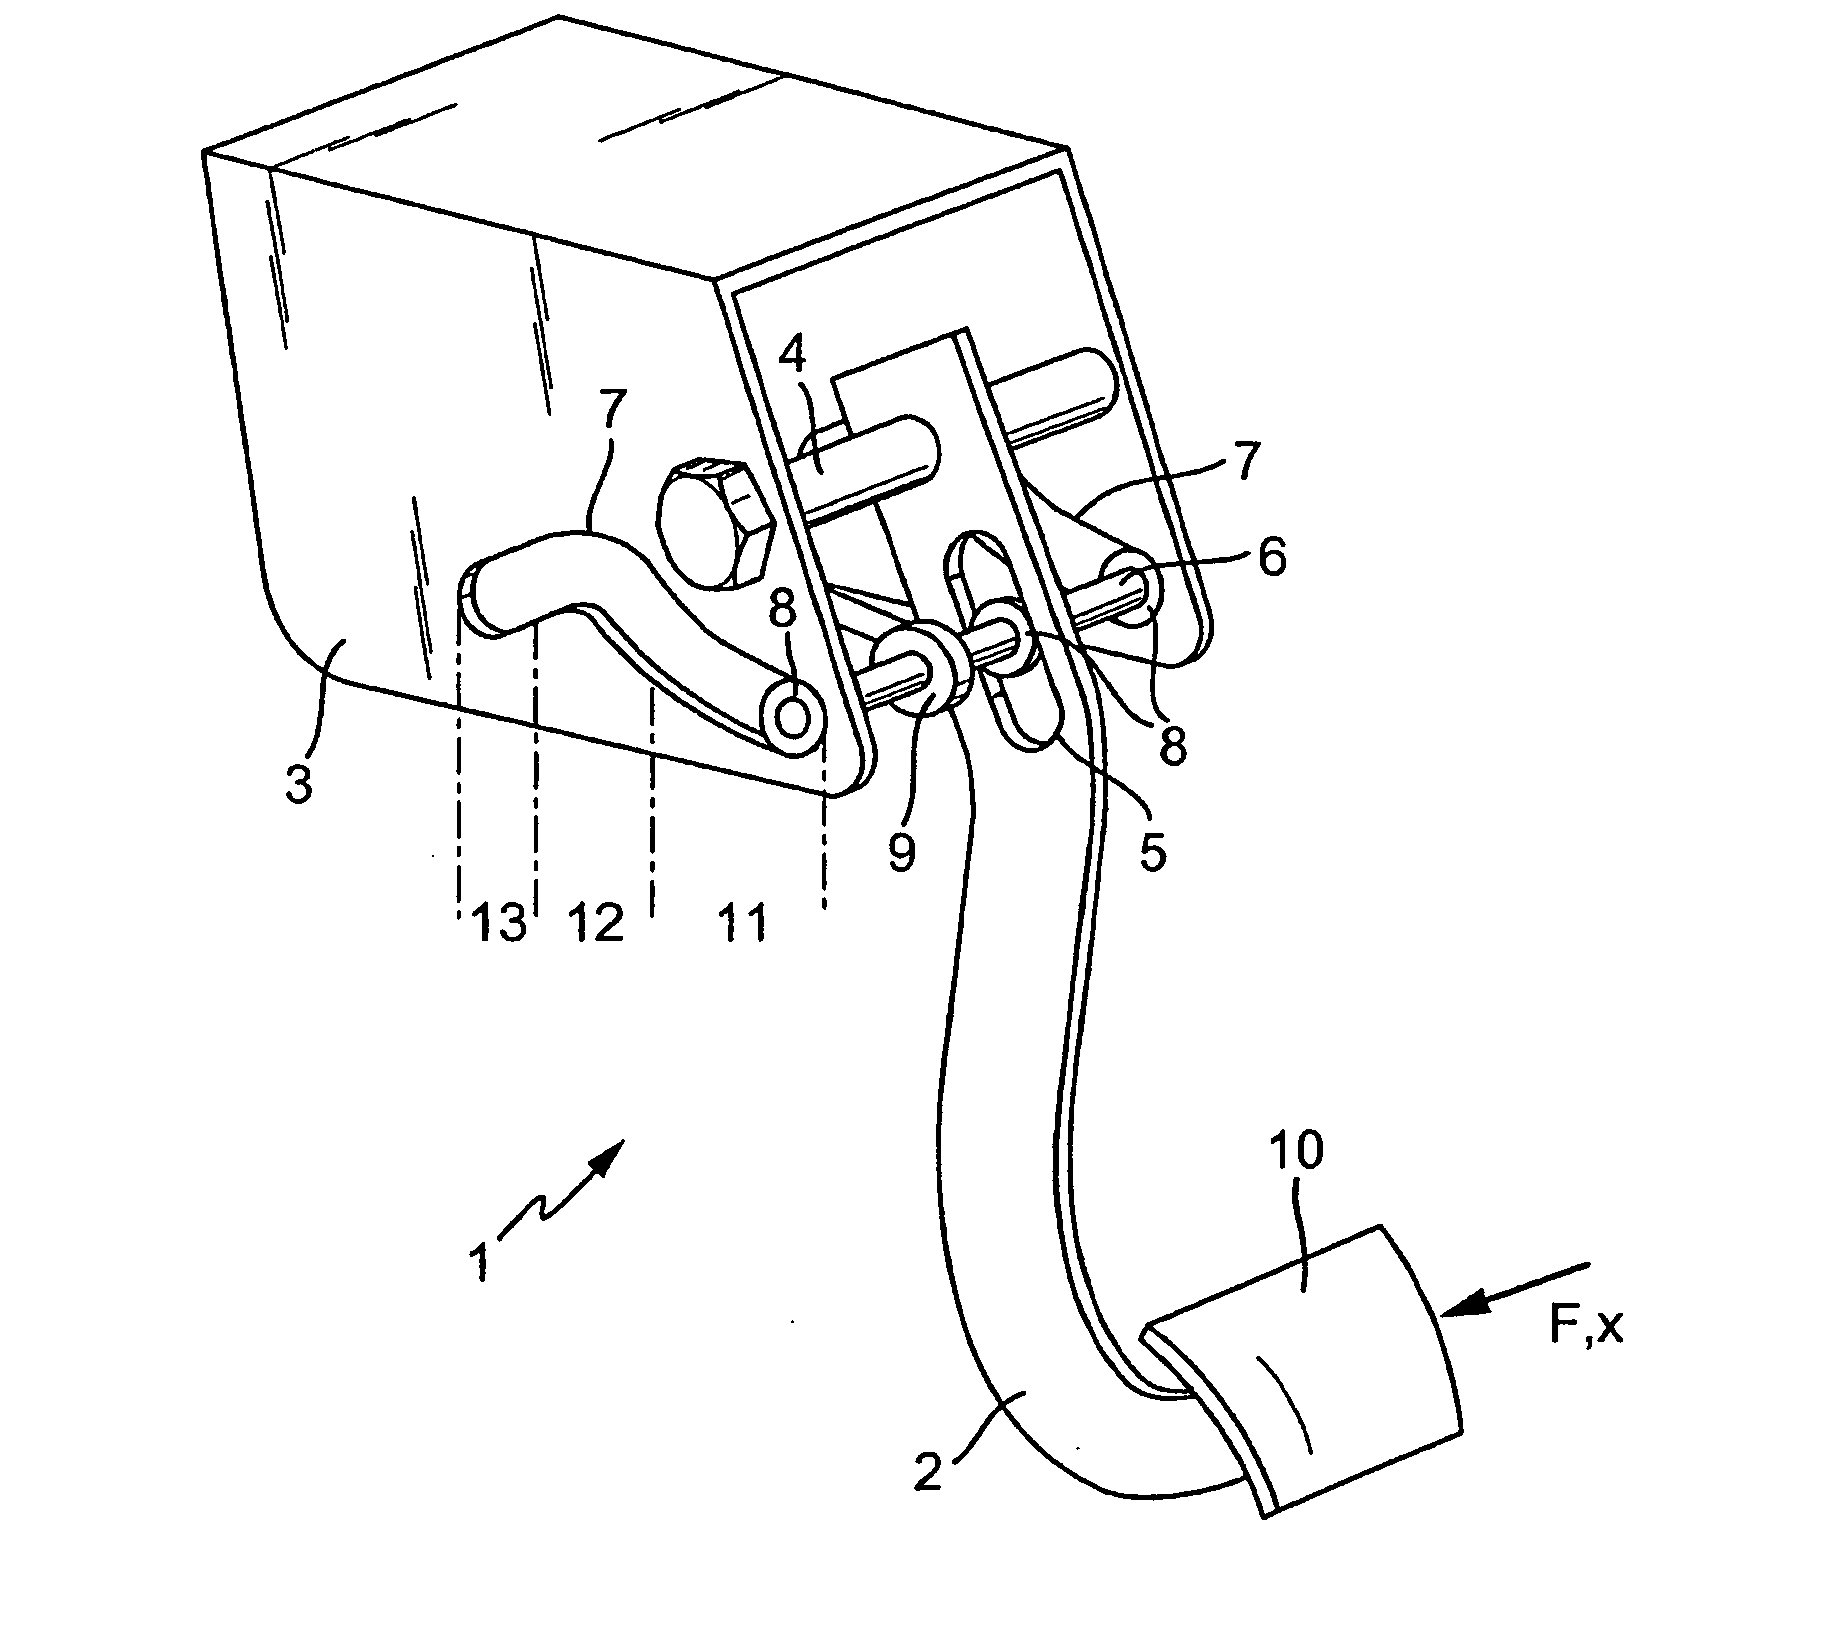 Pedal arrangement for operating a clutch